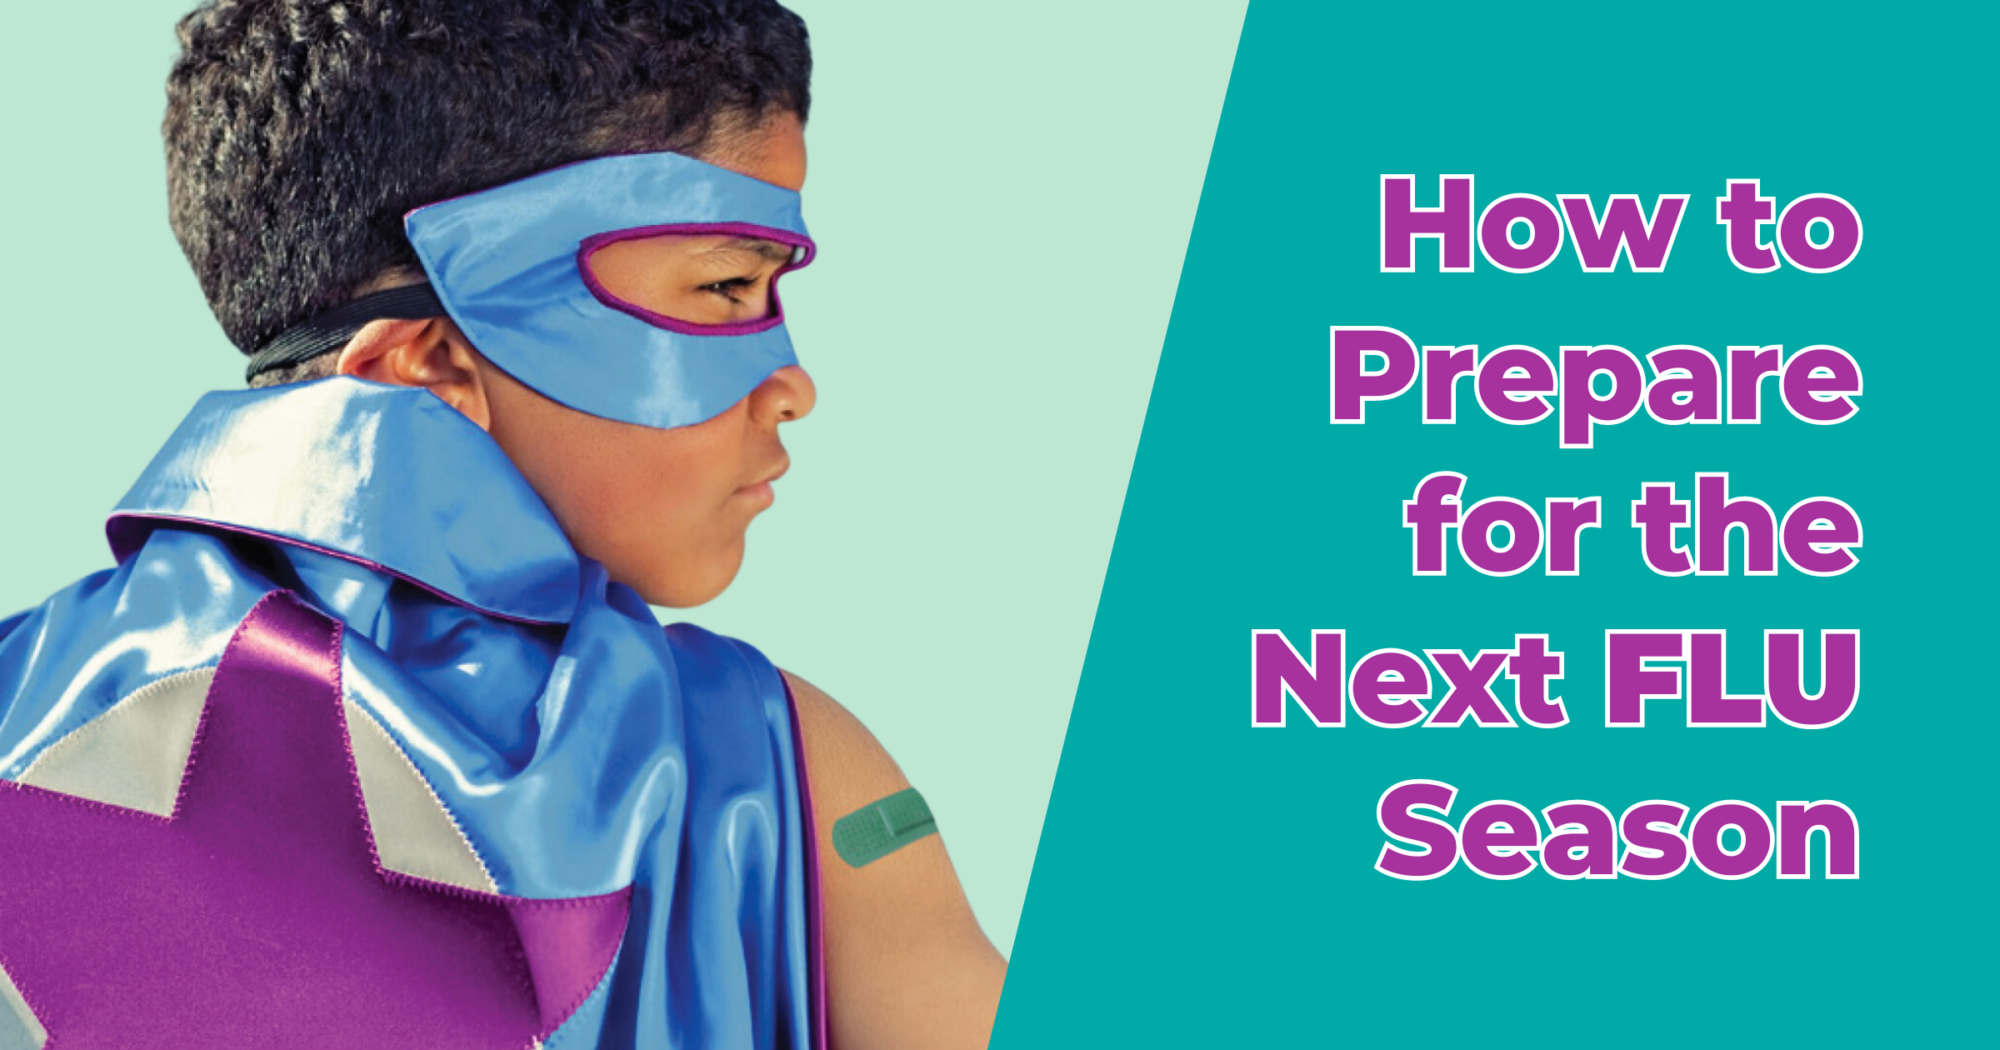 How to Prepare for the Next Flu Season